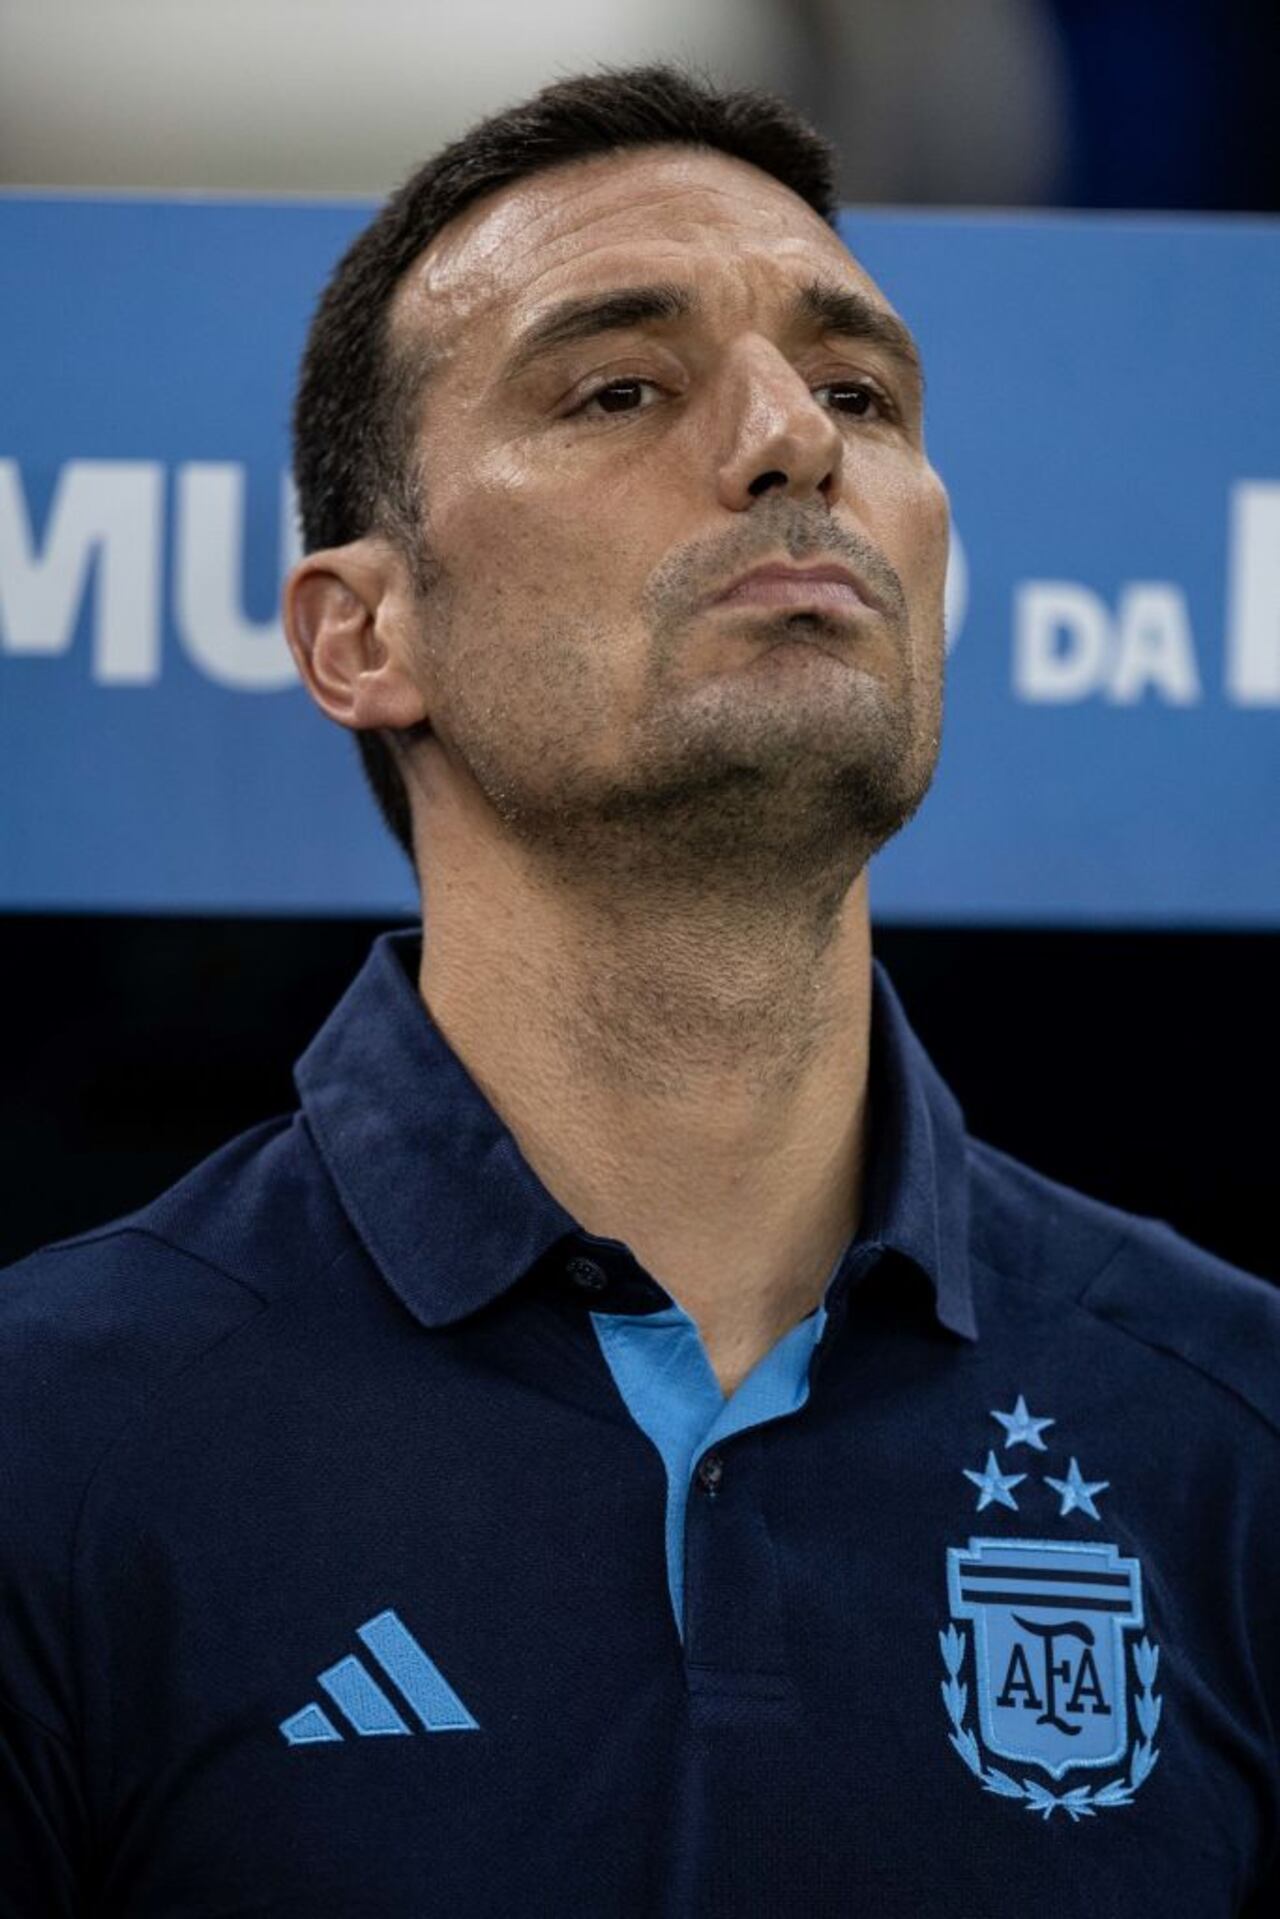 RIO DE JANEIRO, BRAZIL - NOVEMBER 21: Lionel Scaloni, Head Coach of Argentina looks on before the FIFA World Cup 2026 Qualifier match between Brazil and Argentina at Maracana Stadium on November 21, 2023 in Rio de Janeiro, Brazil. (Photo by Marco Galvão/Eurasia Sport Images/Getty Images)